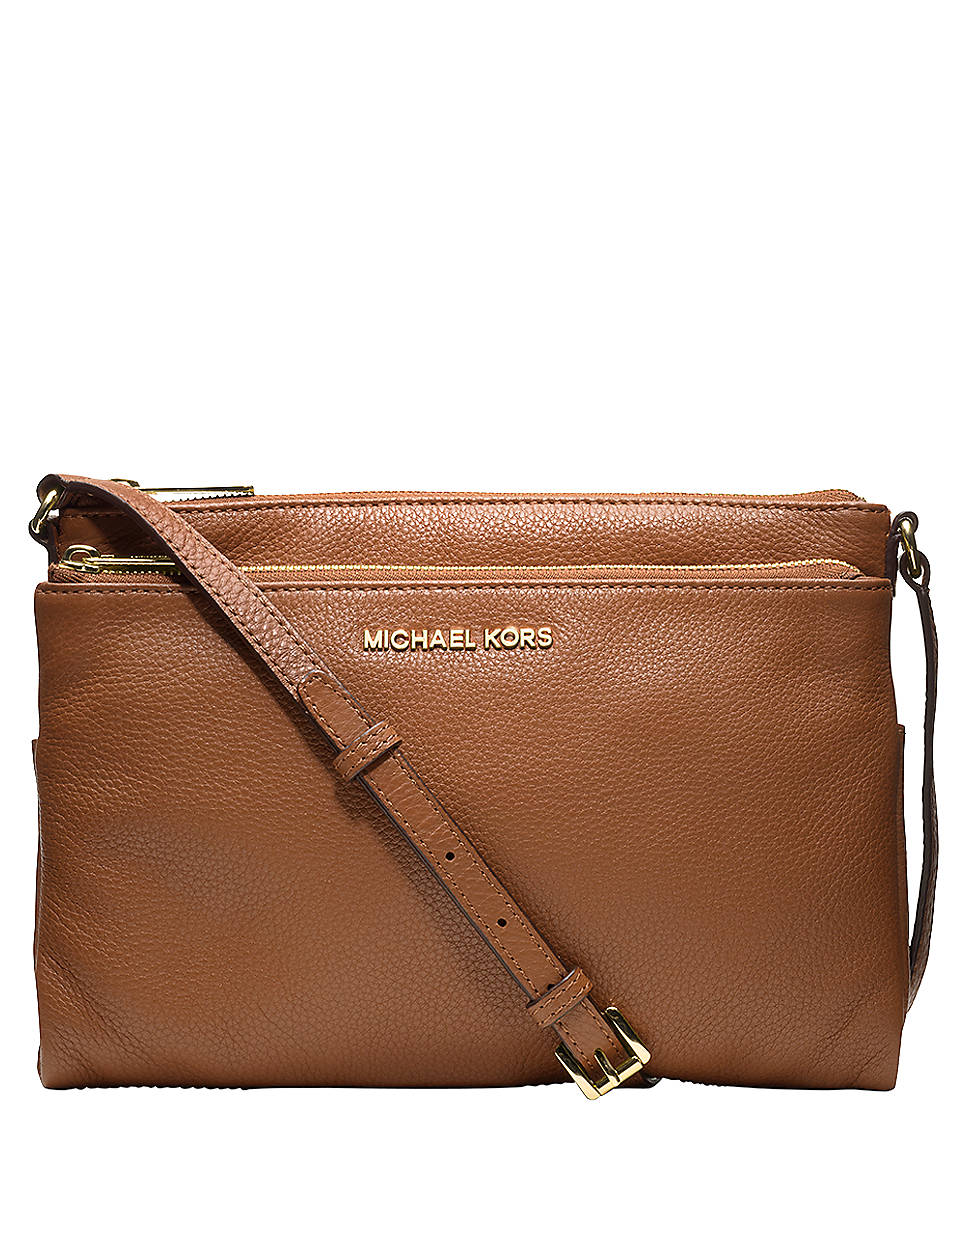 Michael Michael Kors Bedford Leather Extra Large Crossbody Bag in Brown ...